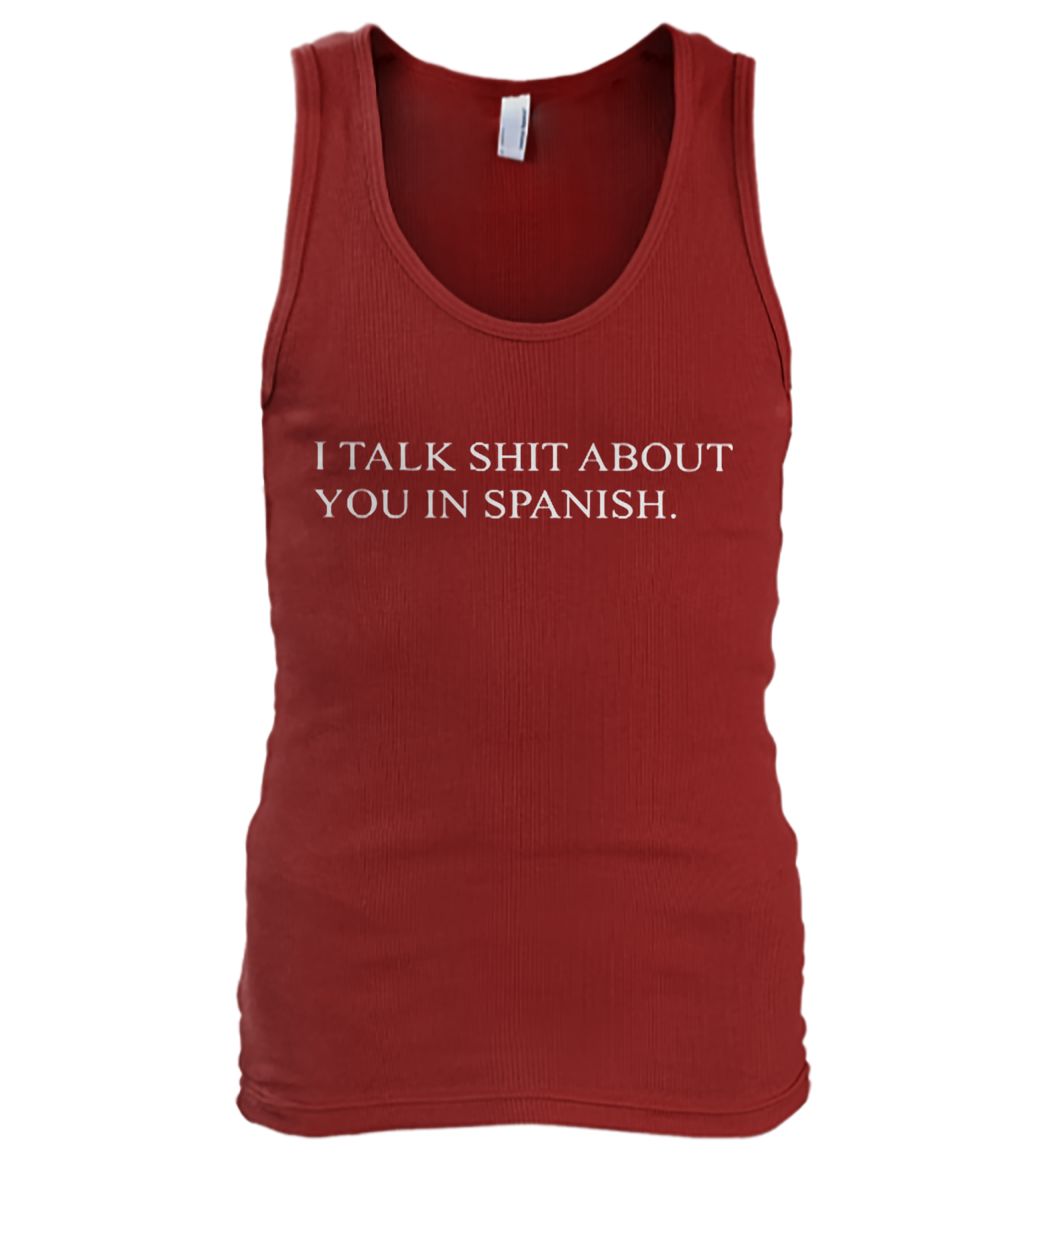 I talk shit about you in spanish men's tank top